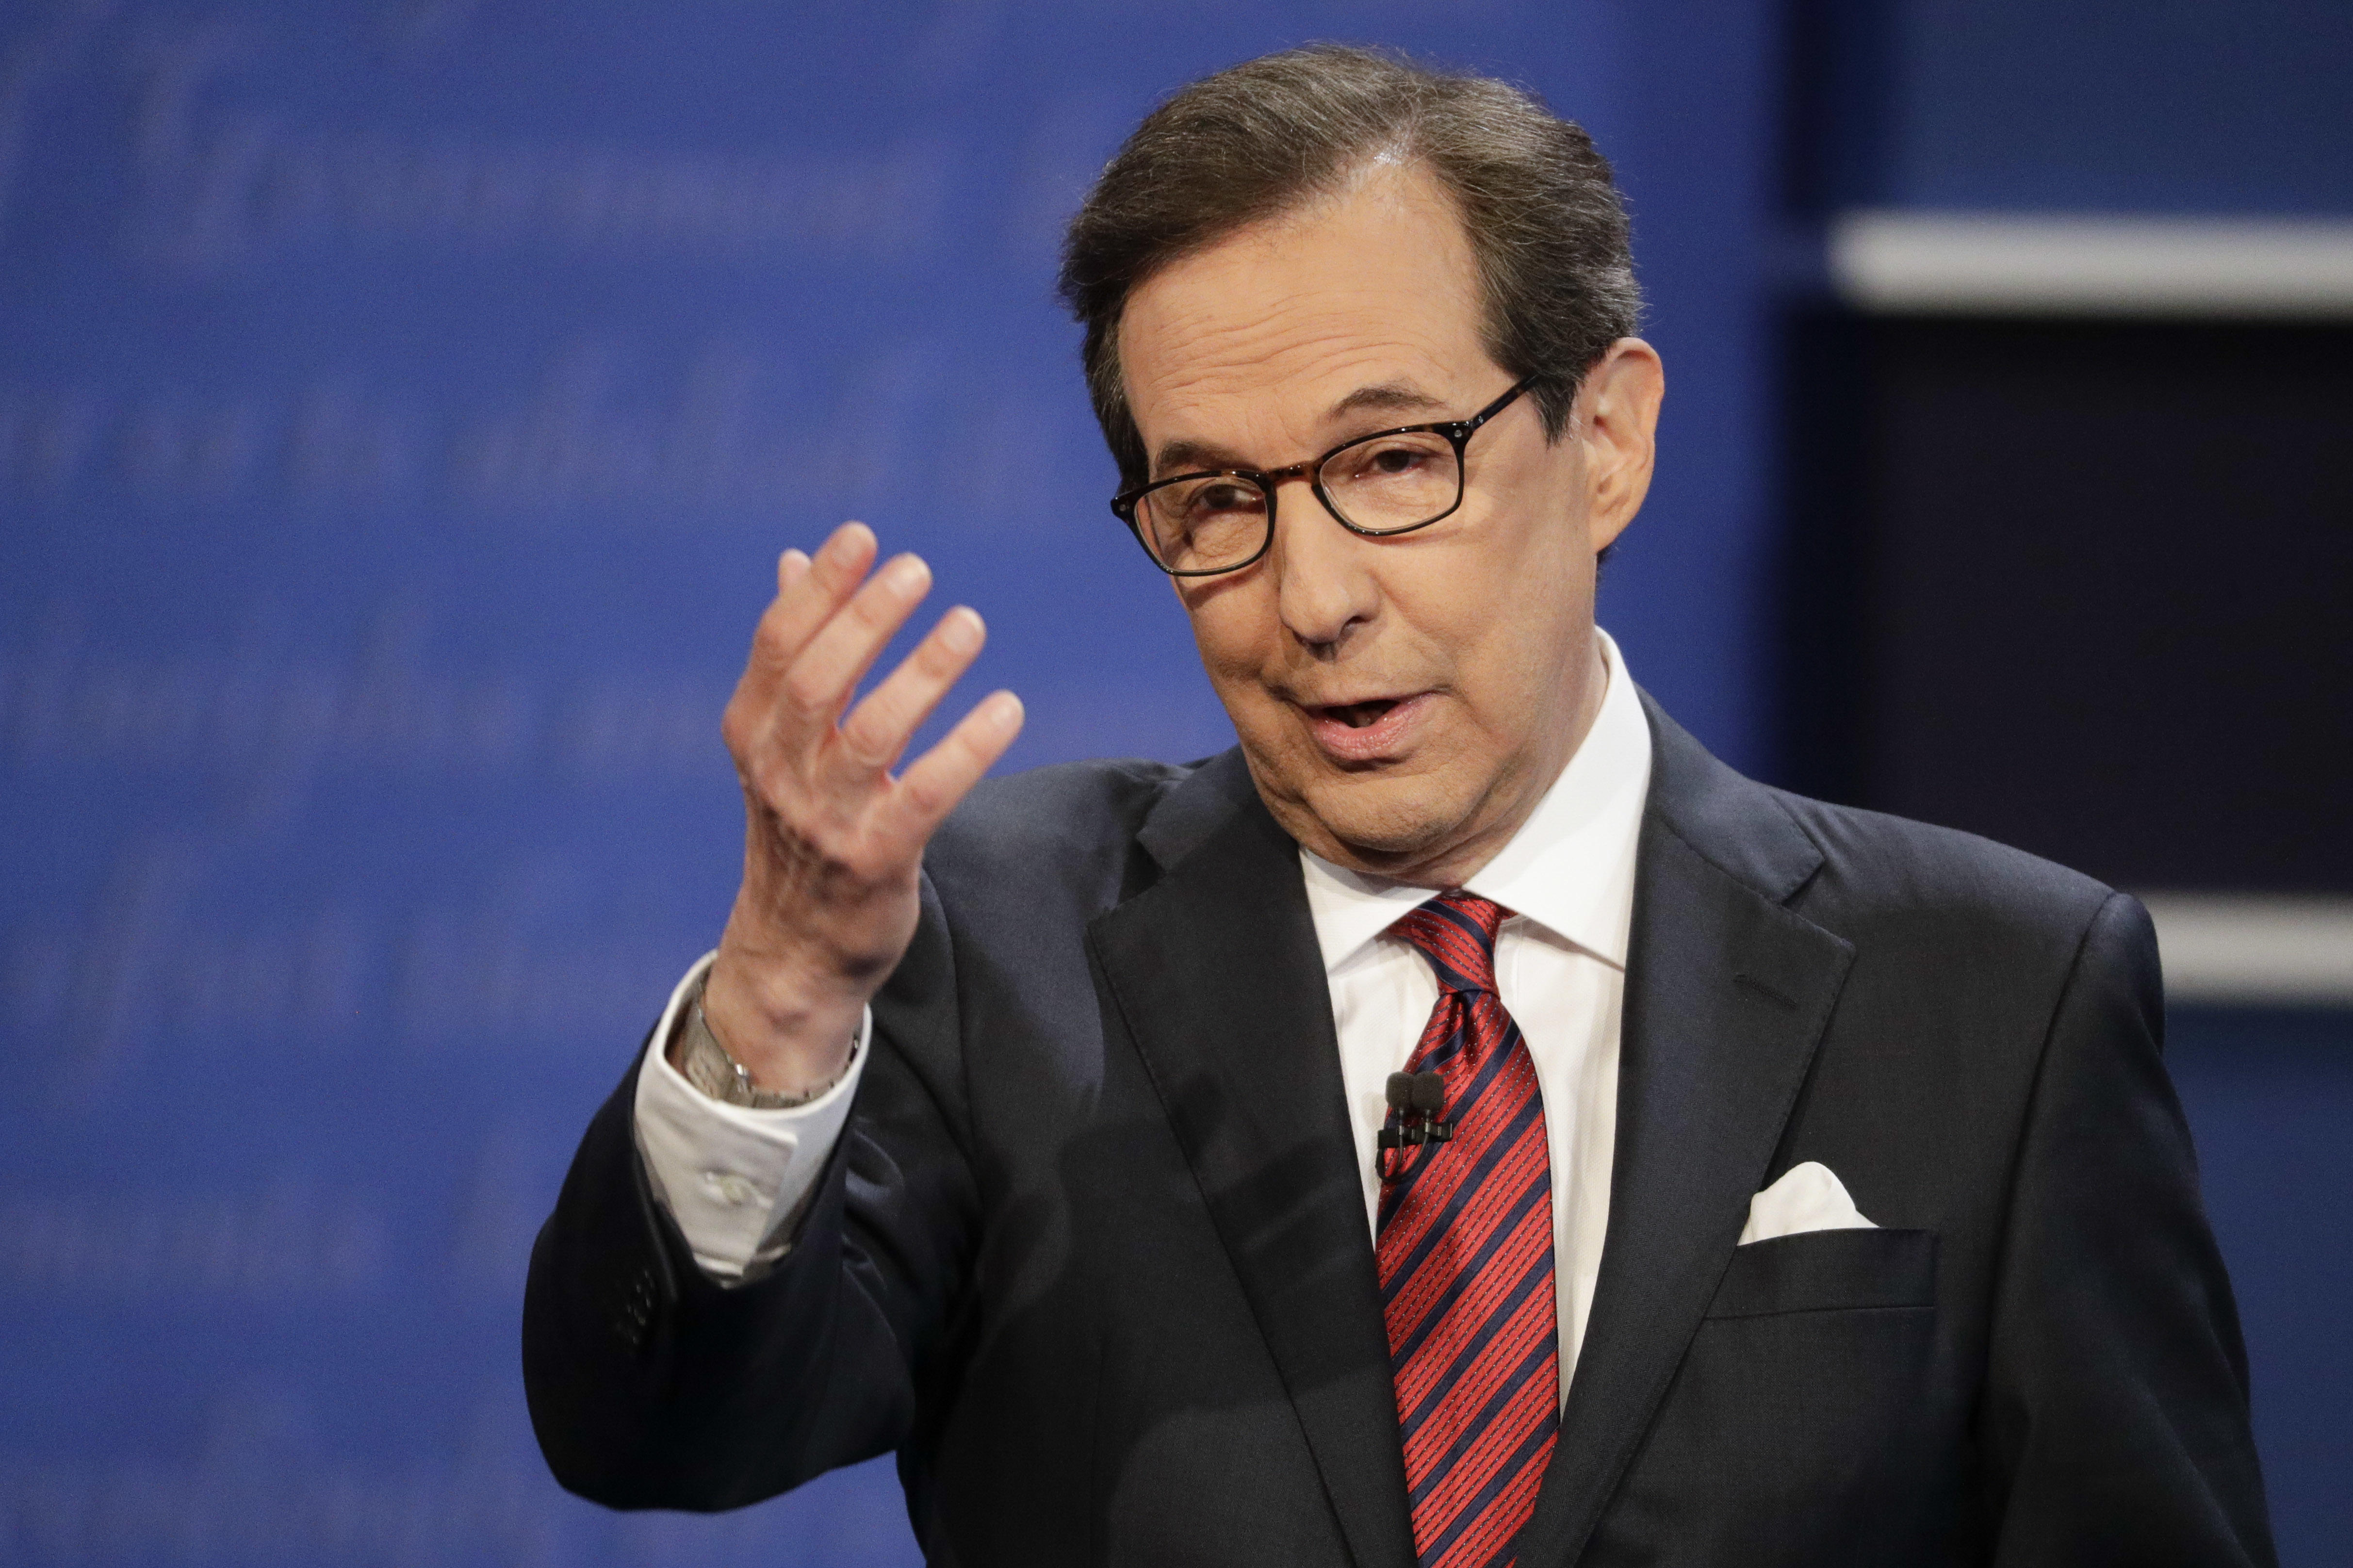 Chris Wallace Five facts about final presidential debate moderator